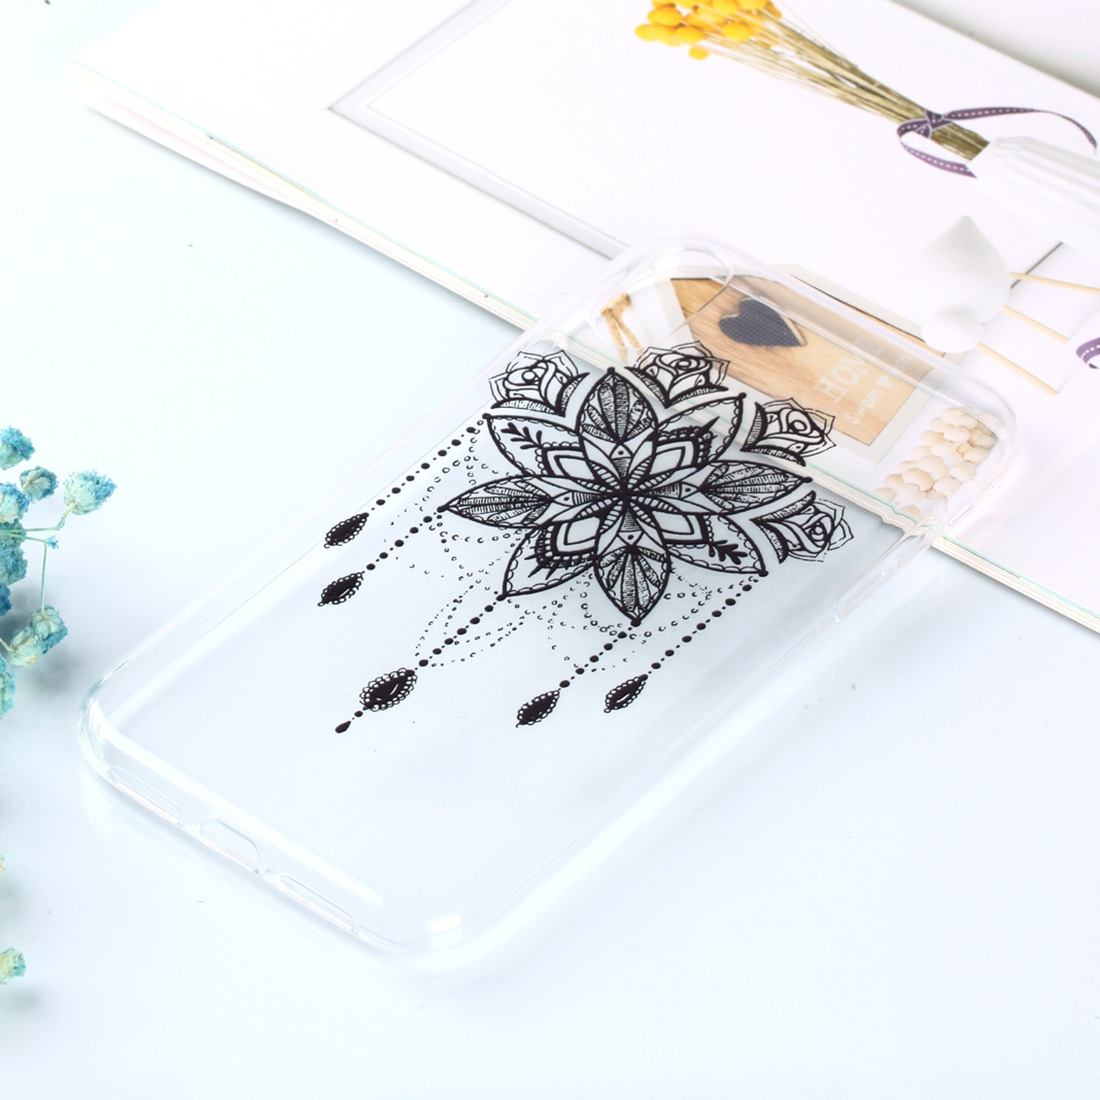 Transparent Varnish Painting Soft TPU Case For iPhone XR,Bead Windbell